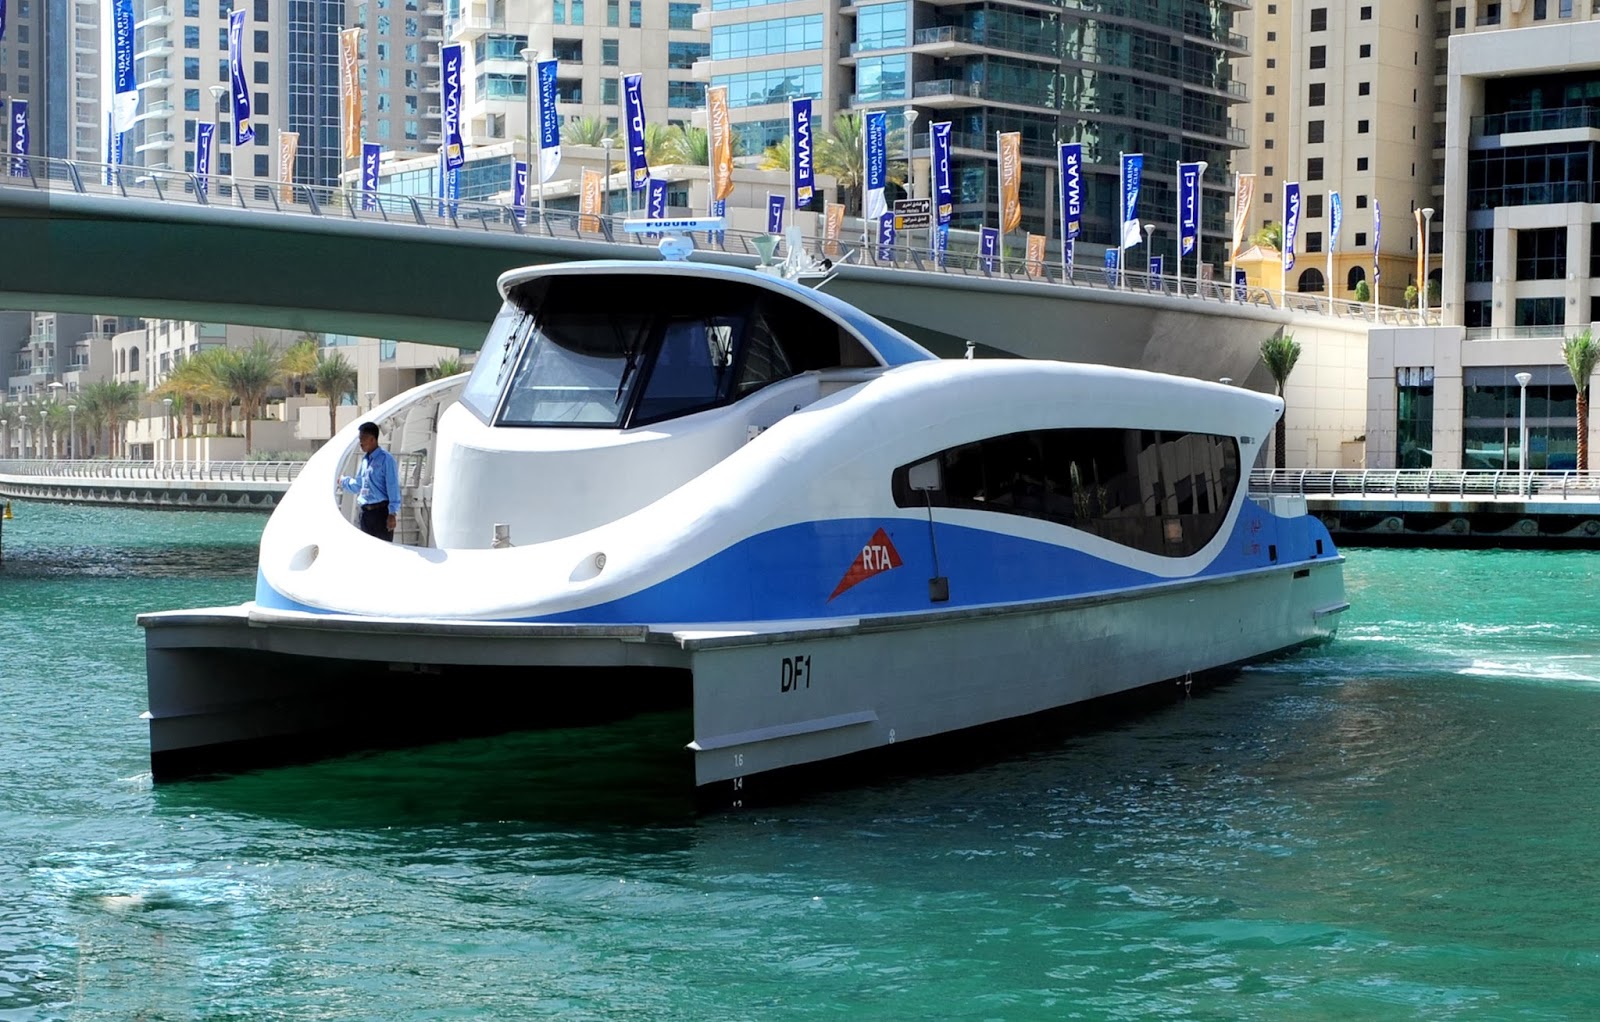 8 Things You Must Know About the Dubai Ferry - Dubai Expats Guide